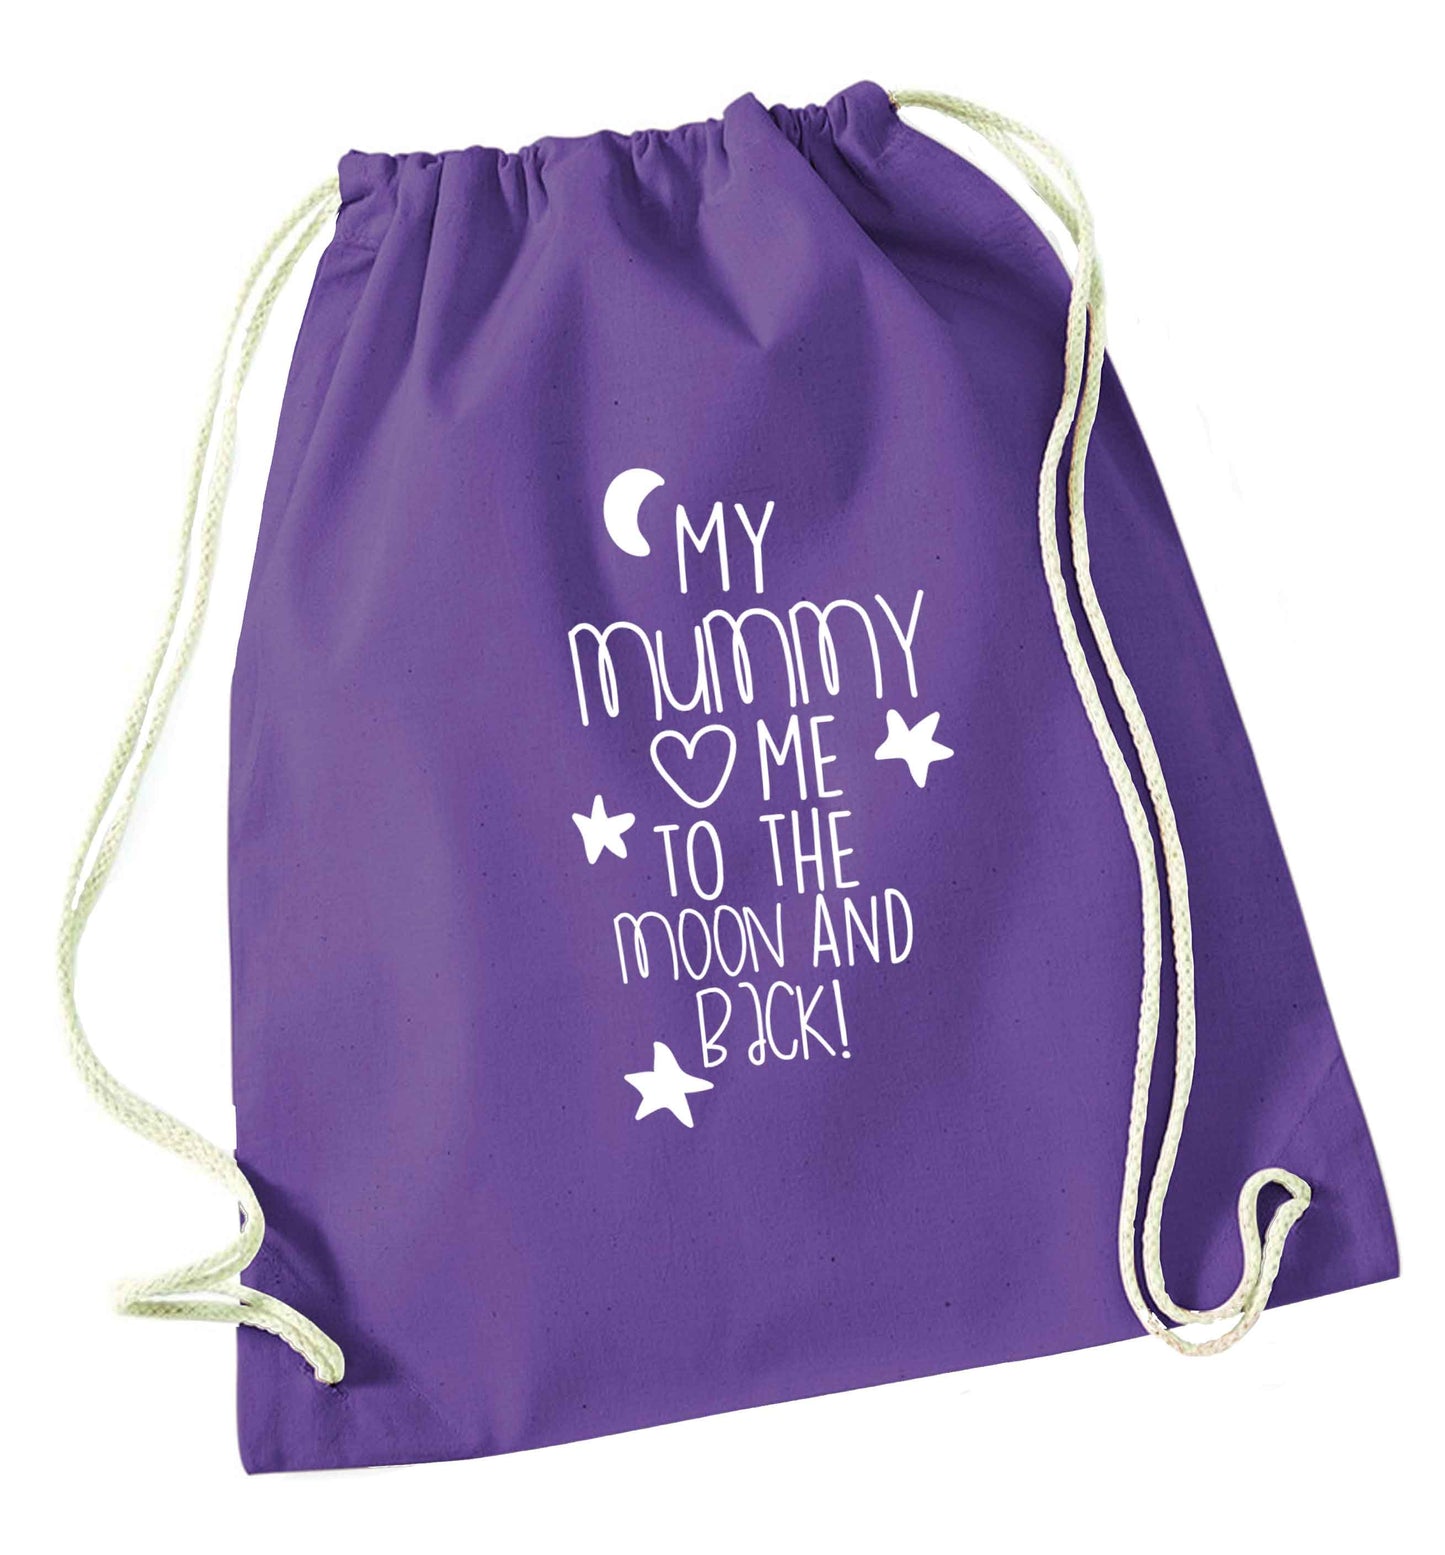 My mum loves me to the moon and back purple drawstring bag